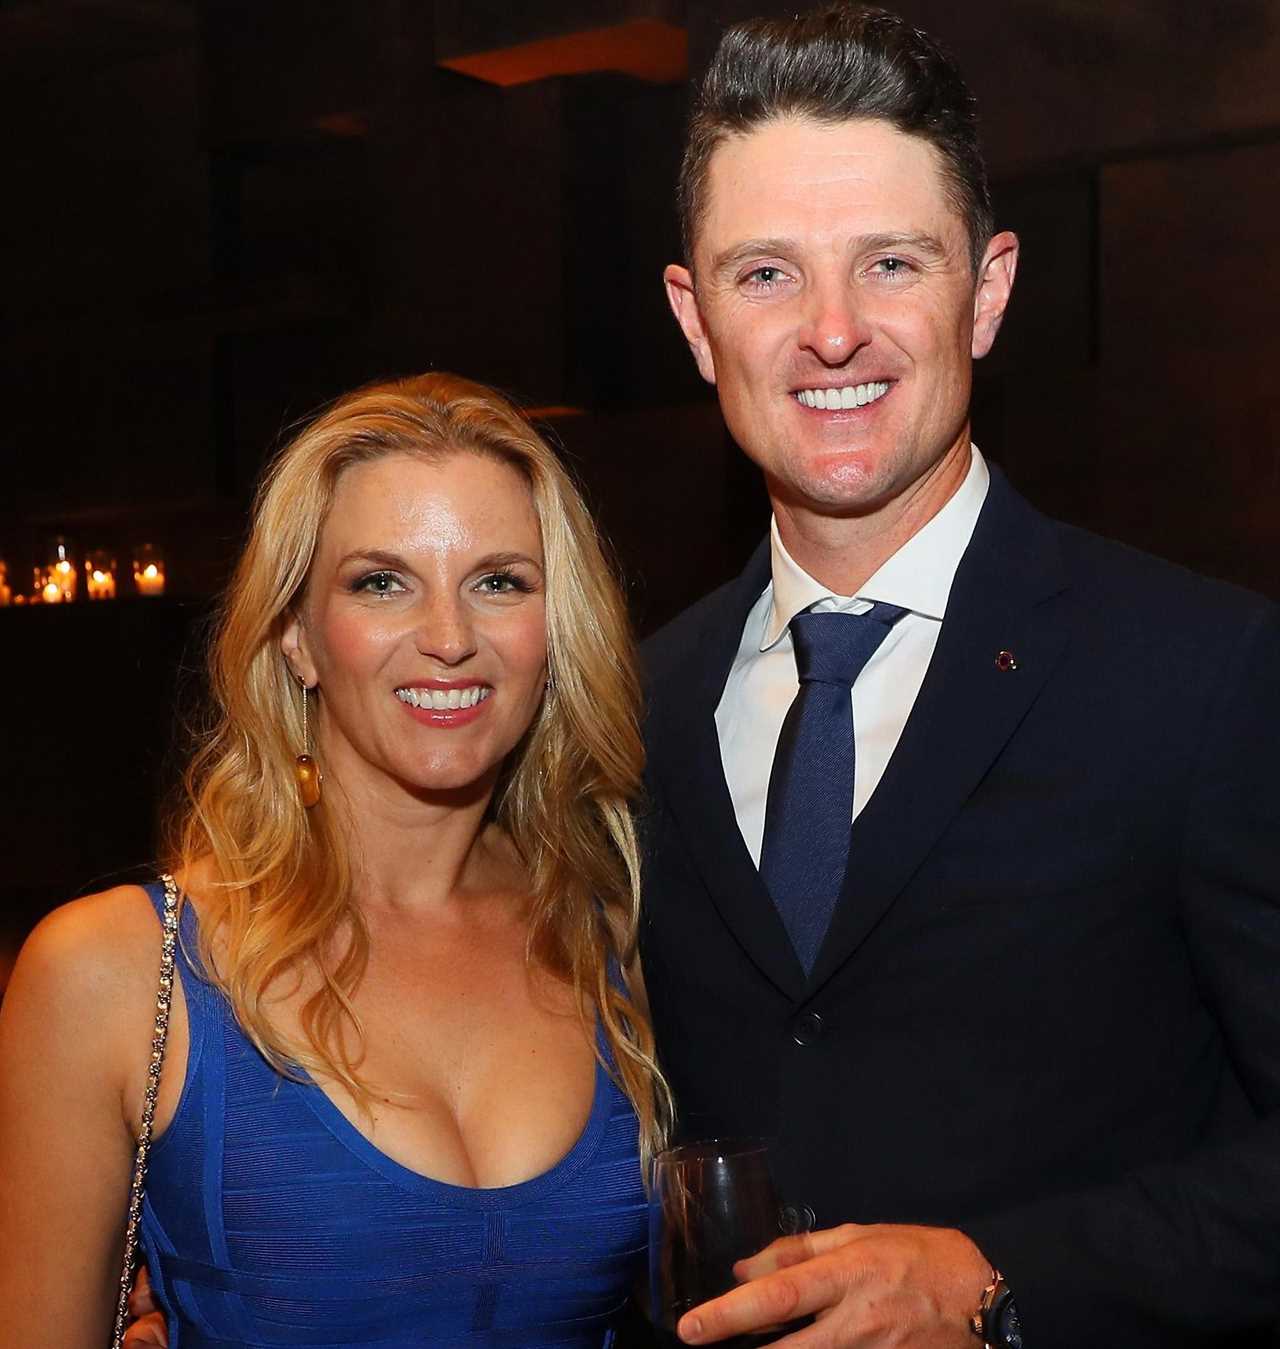 Justin Rose and his wife Rose at the 2016 Ryder Cup